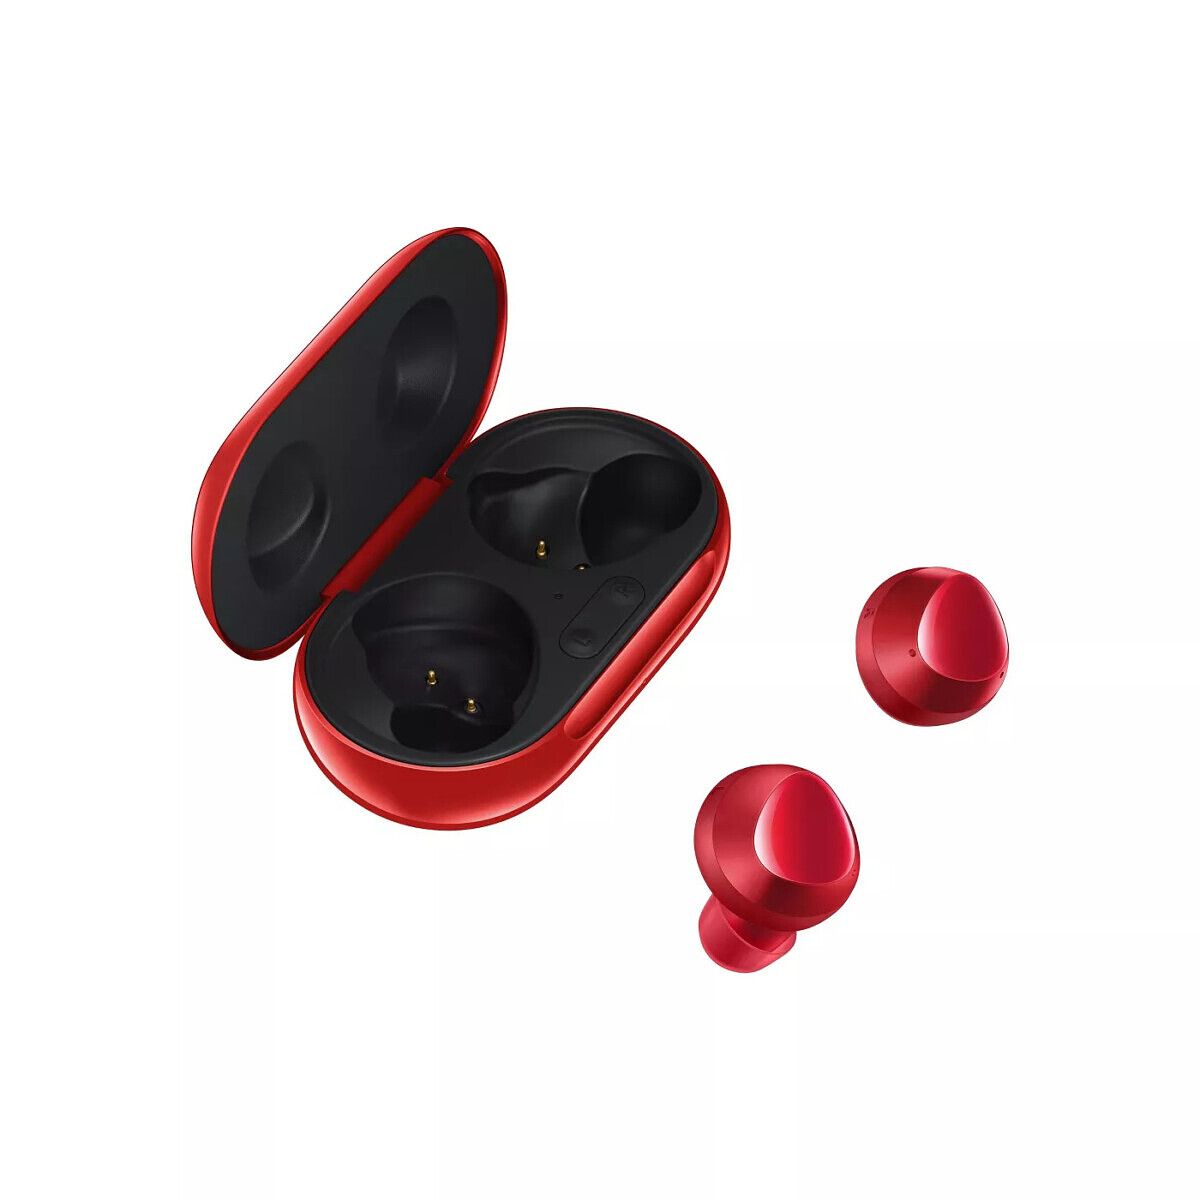 The Samsung Galaxy Buds+ offer 11 straight hours of music on a single charge, as well as Ambient Aware to make sure you know what's going on around you. Grab a pair in your favorite color for $20 off at Target!